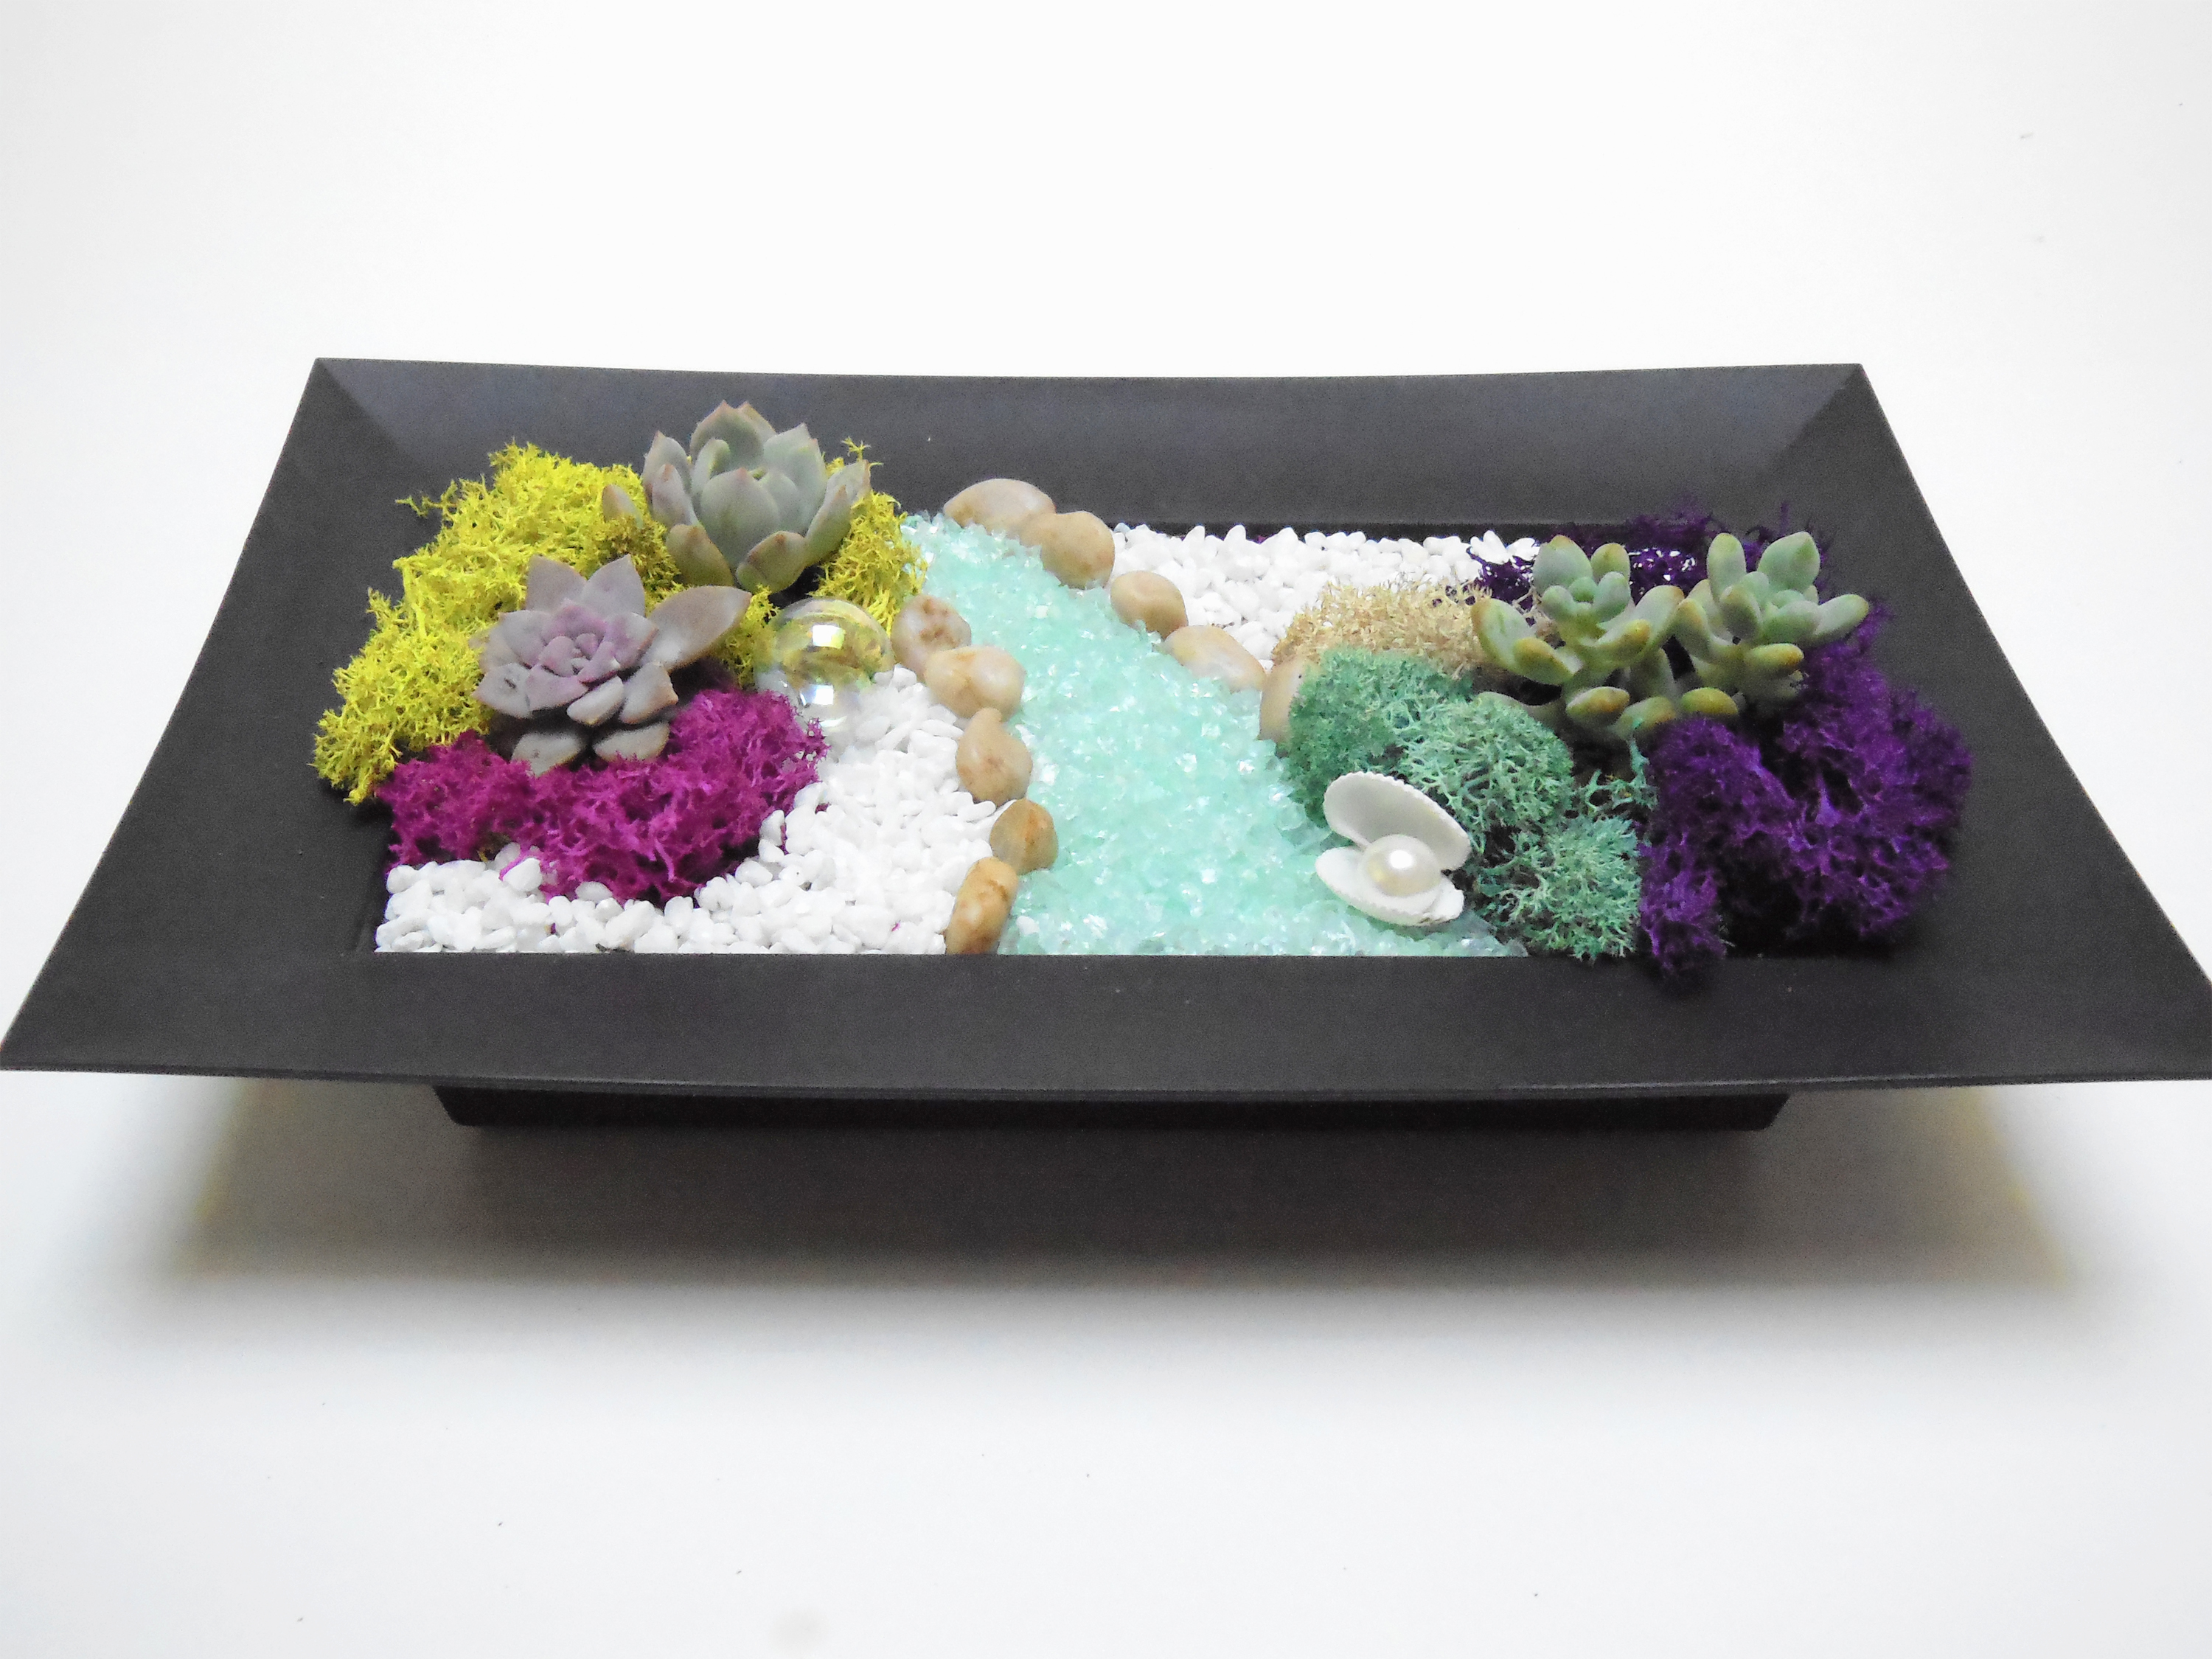 A Secret Garden  Rectangular Tray plant nite project by Yaymaker